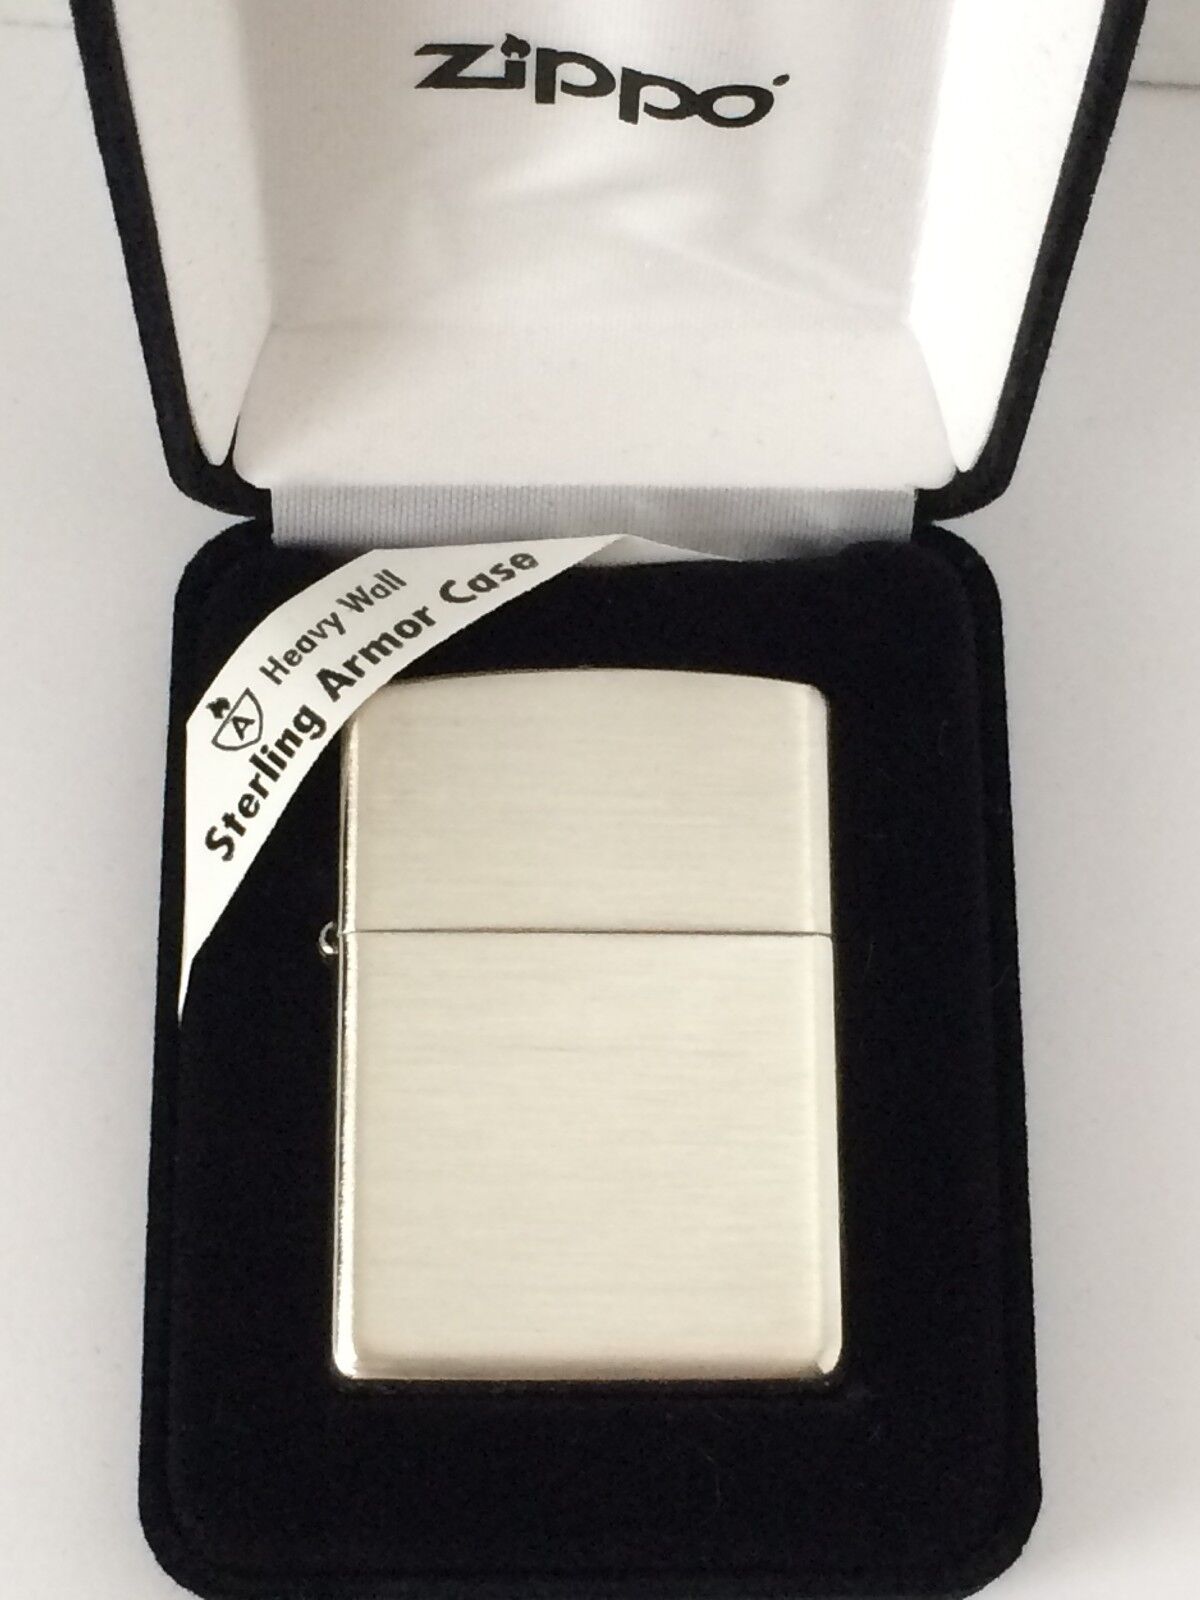 Armor Sterling Silver Zippo Lighter With Brushed Finish, # 27, New 